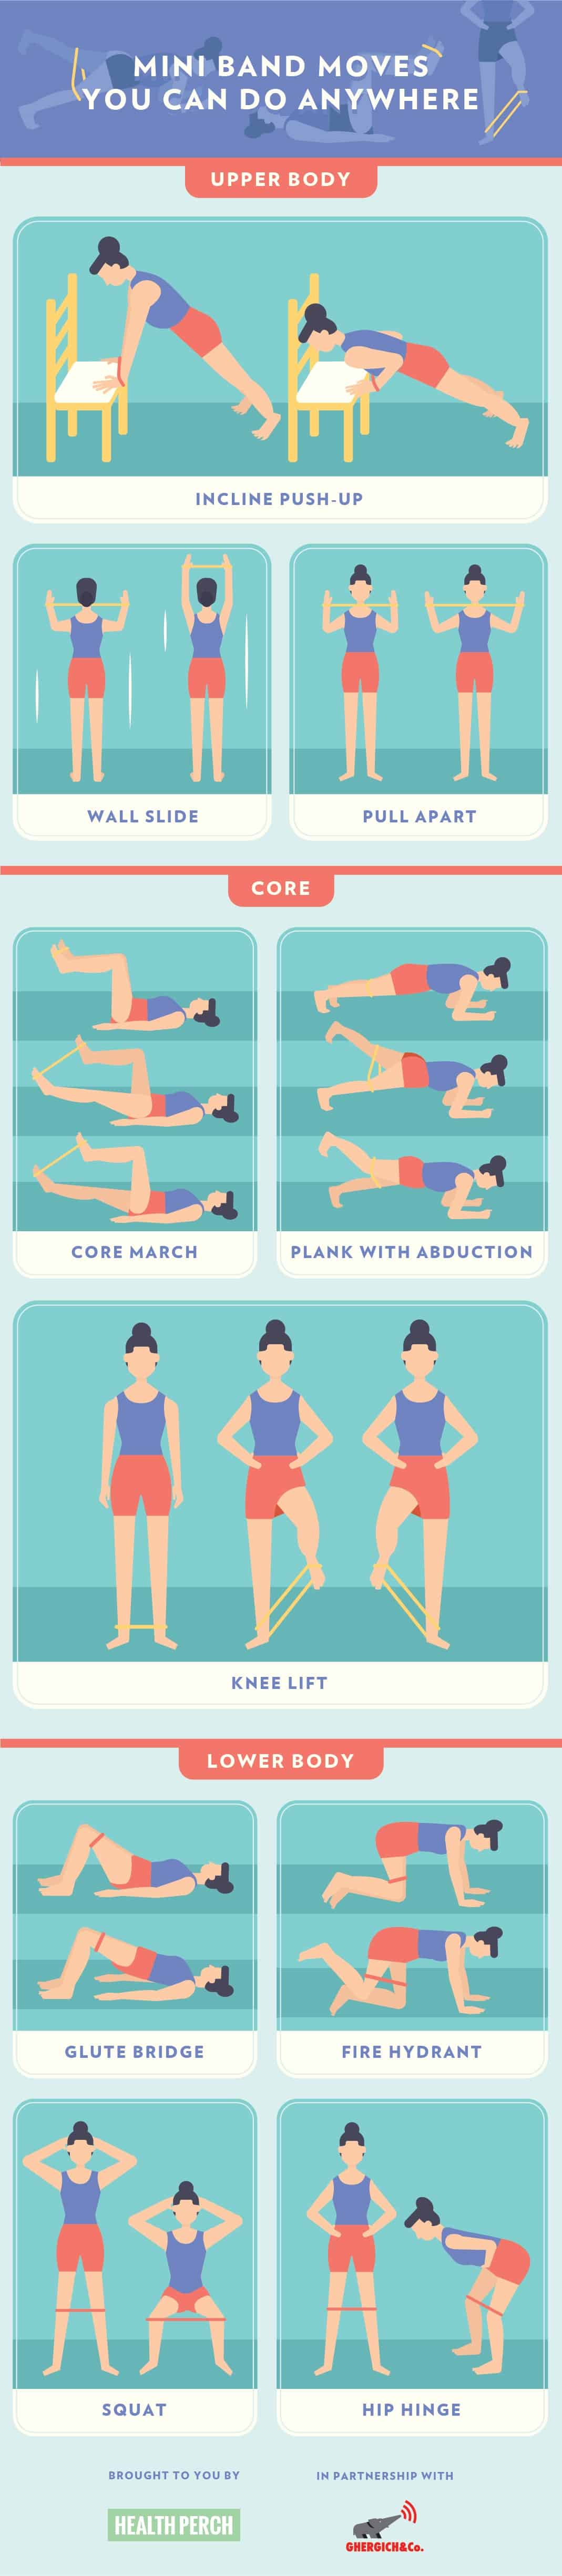 10 Mini Band Moves You Can Do Anywhere